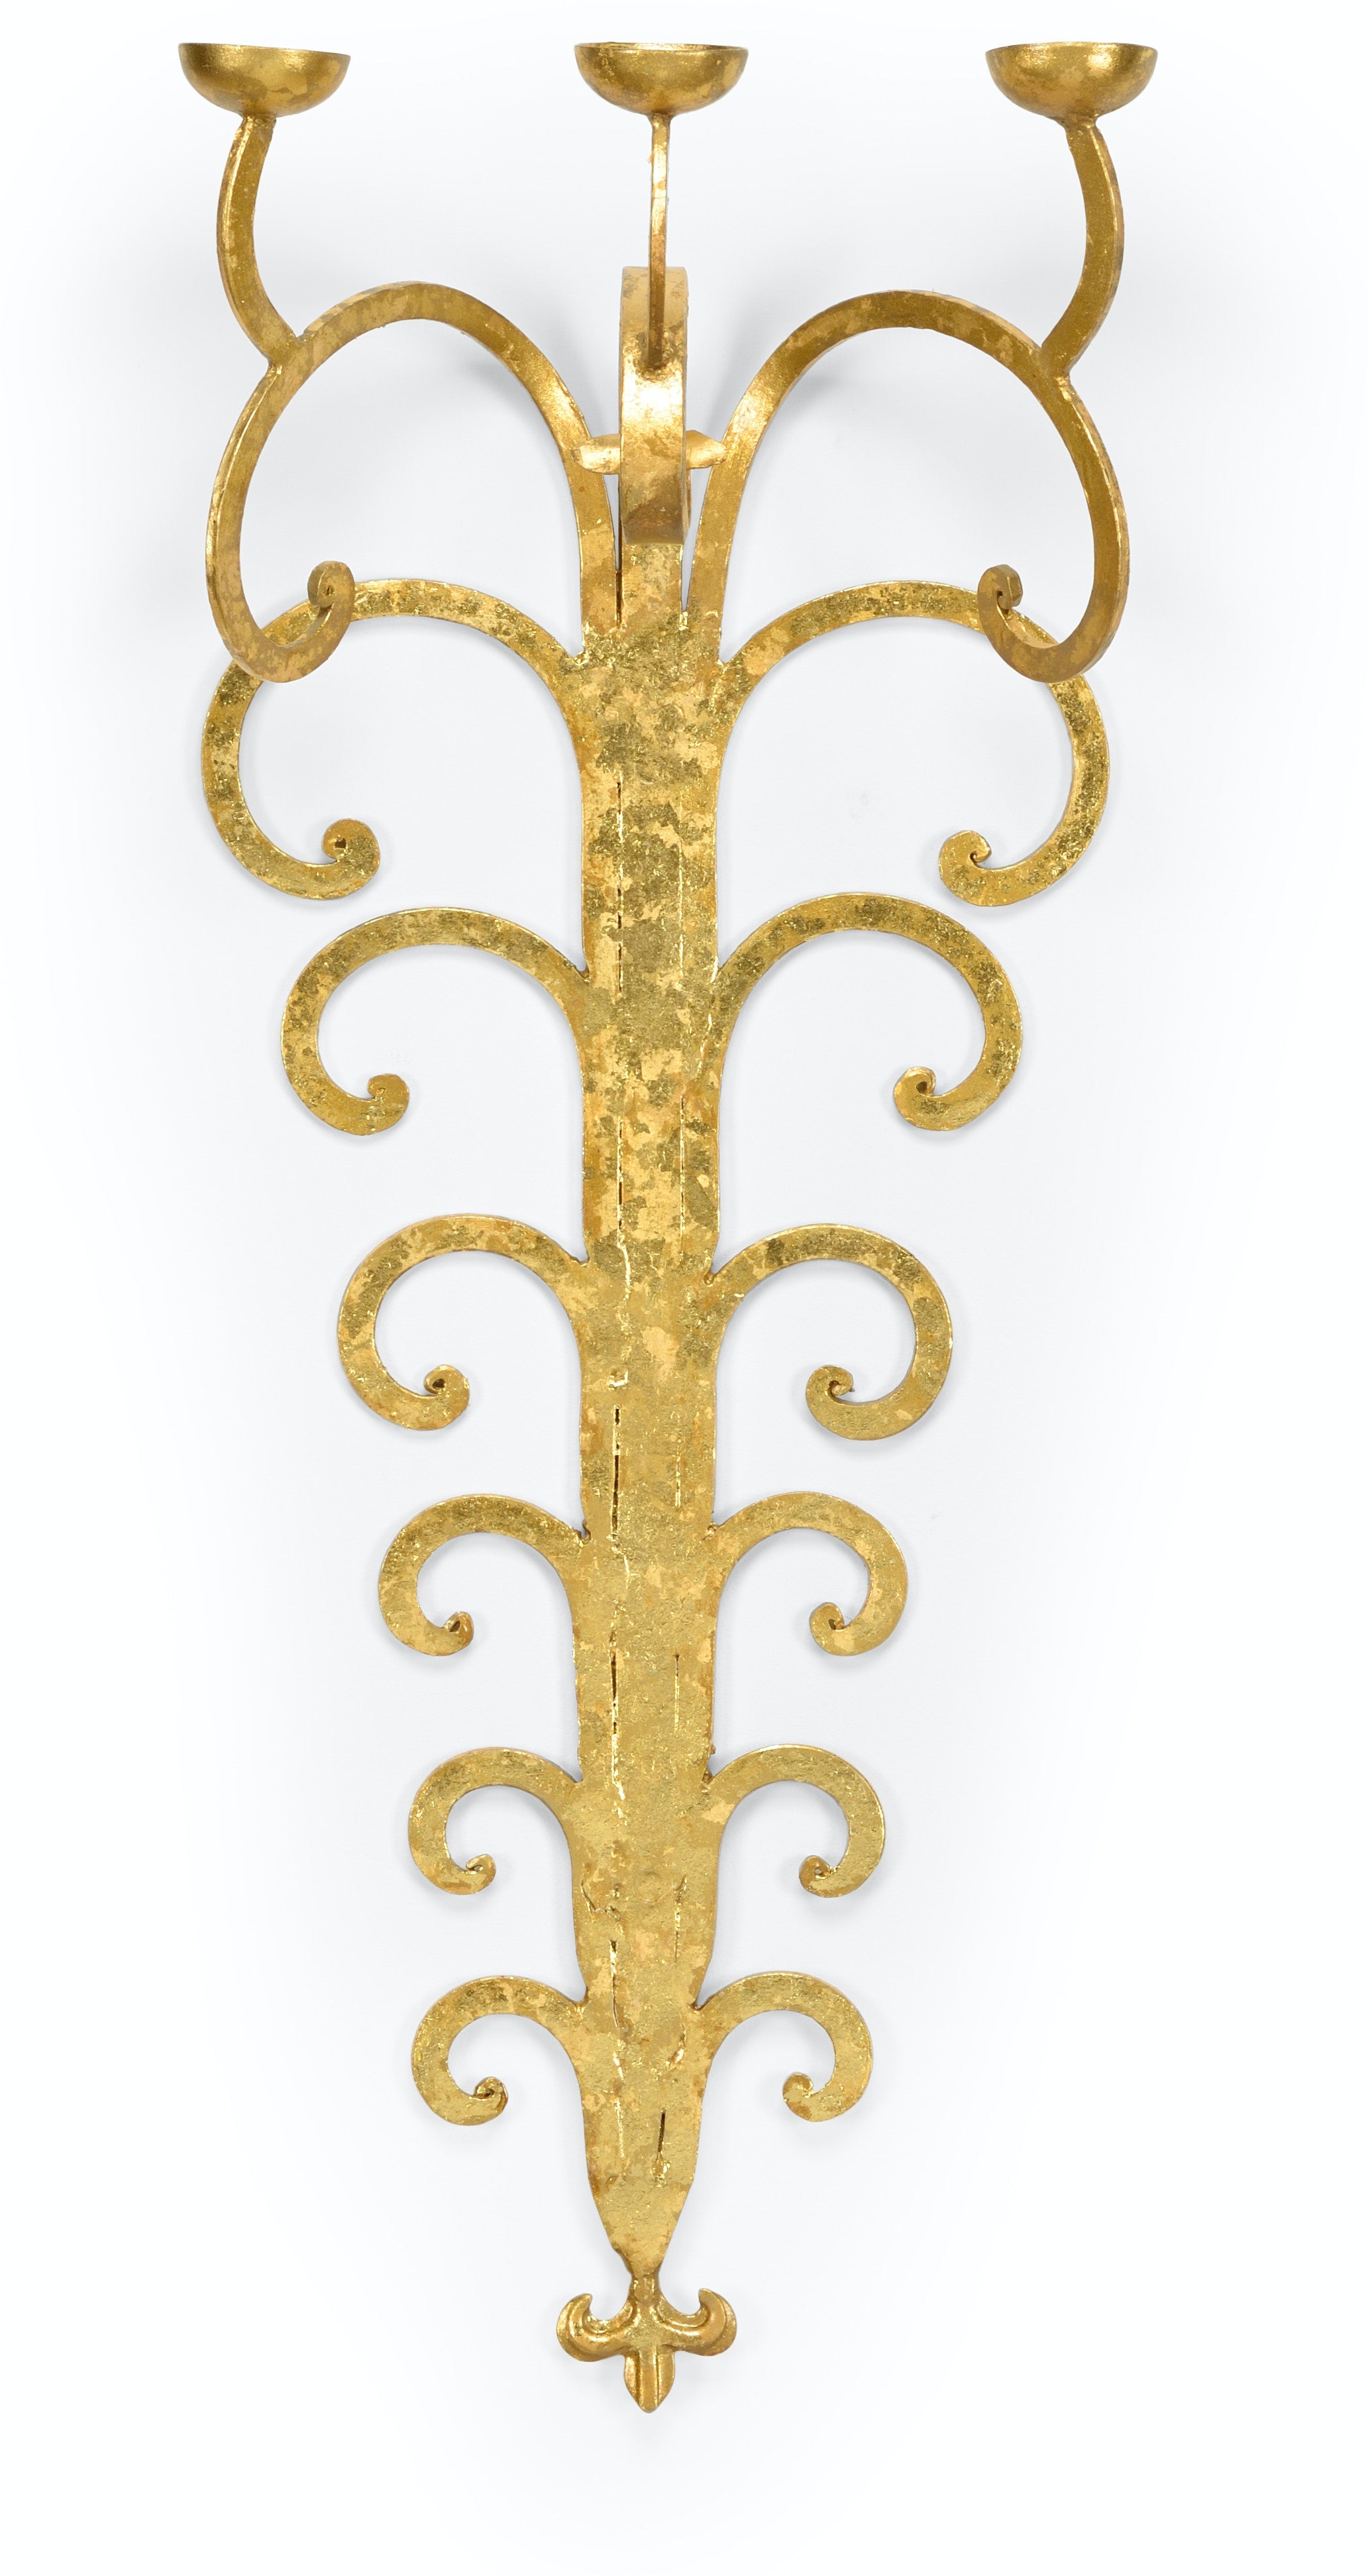 Tall Candle Sconce